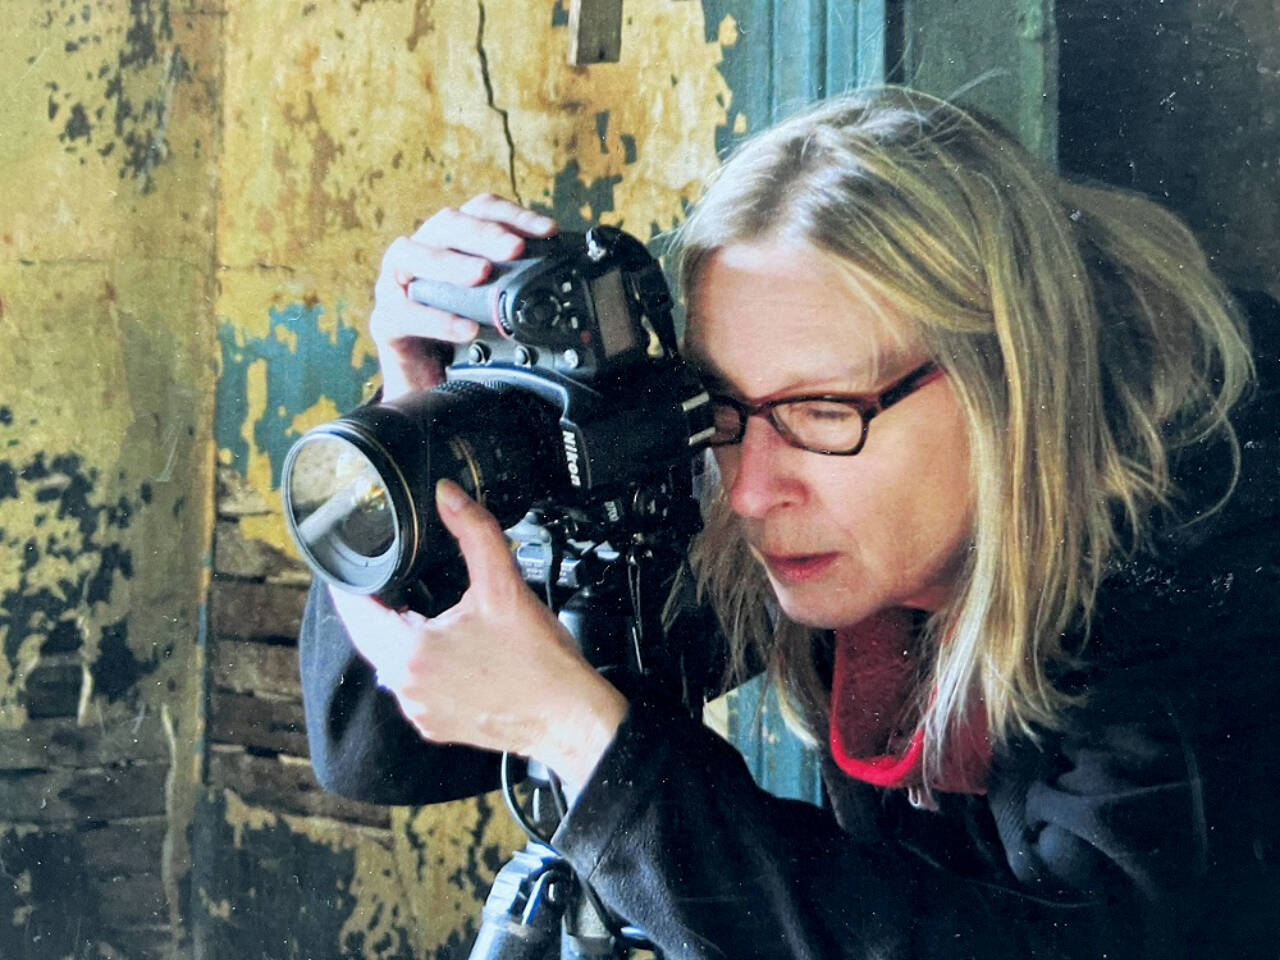 The late Karen Rozbicki Stringer, a fine art photographer is shown at work. Her photographs will be displayed In Memoriam at the Blue Whole Gallery in March.